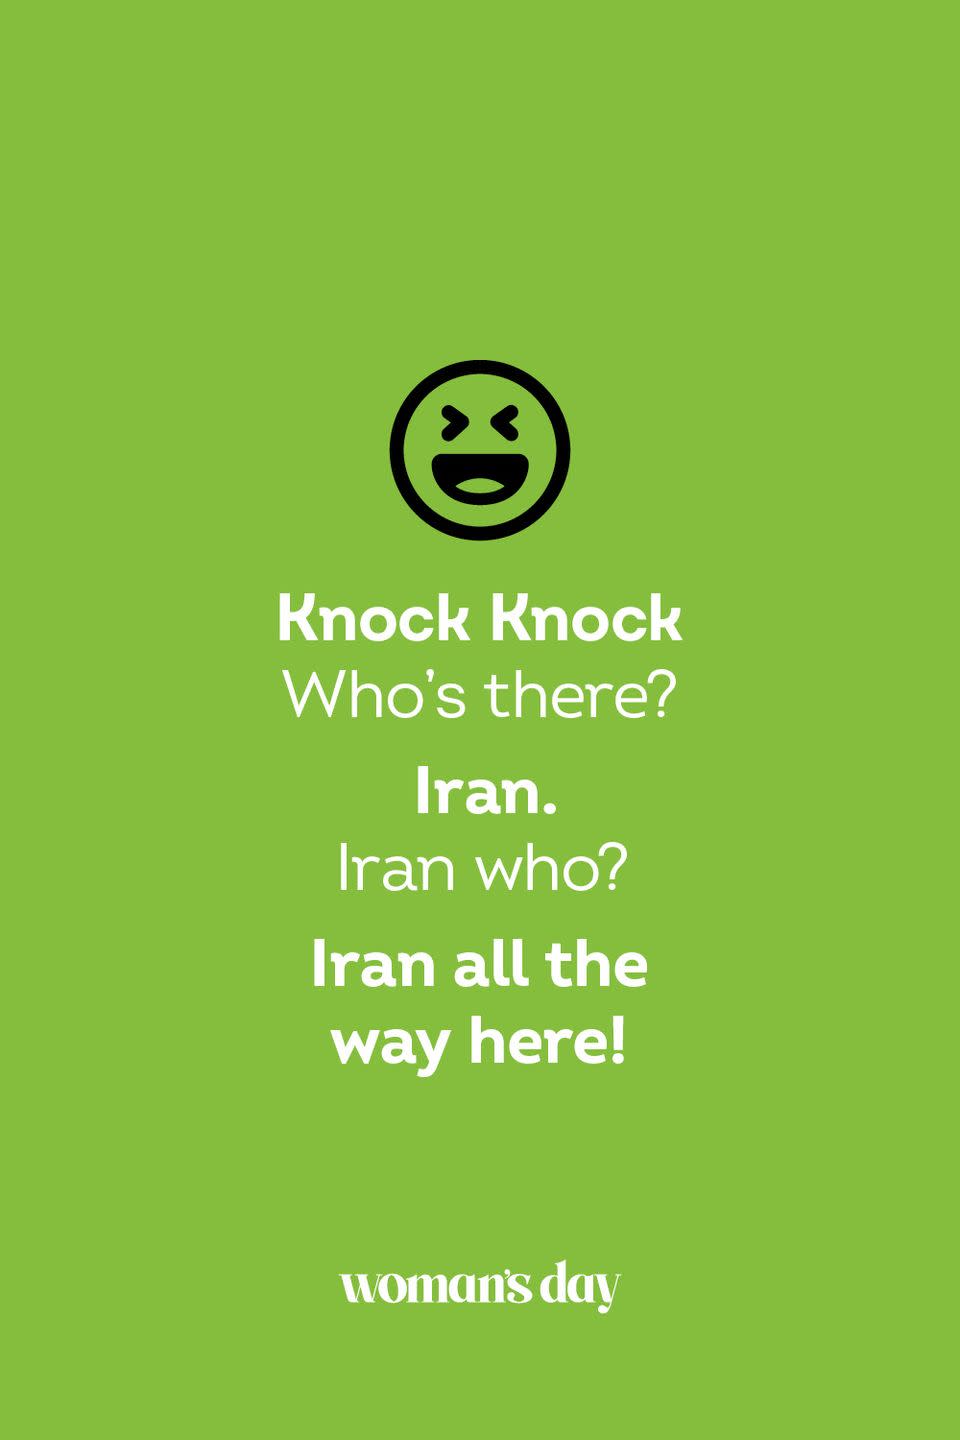 <p><strong>Knock Knock</strong></p><p><em>Who’s there? </em></p><p><strong>Iran.</strong></p><p><em>Iran who?</em></p><p><strong>Iran all the way here!</strong></p>